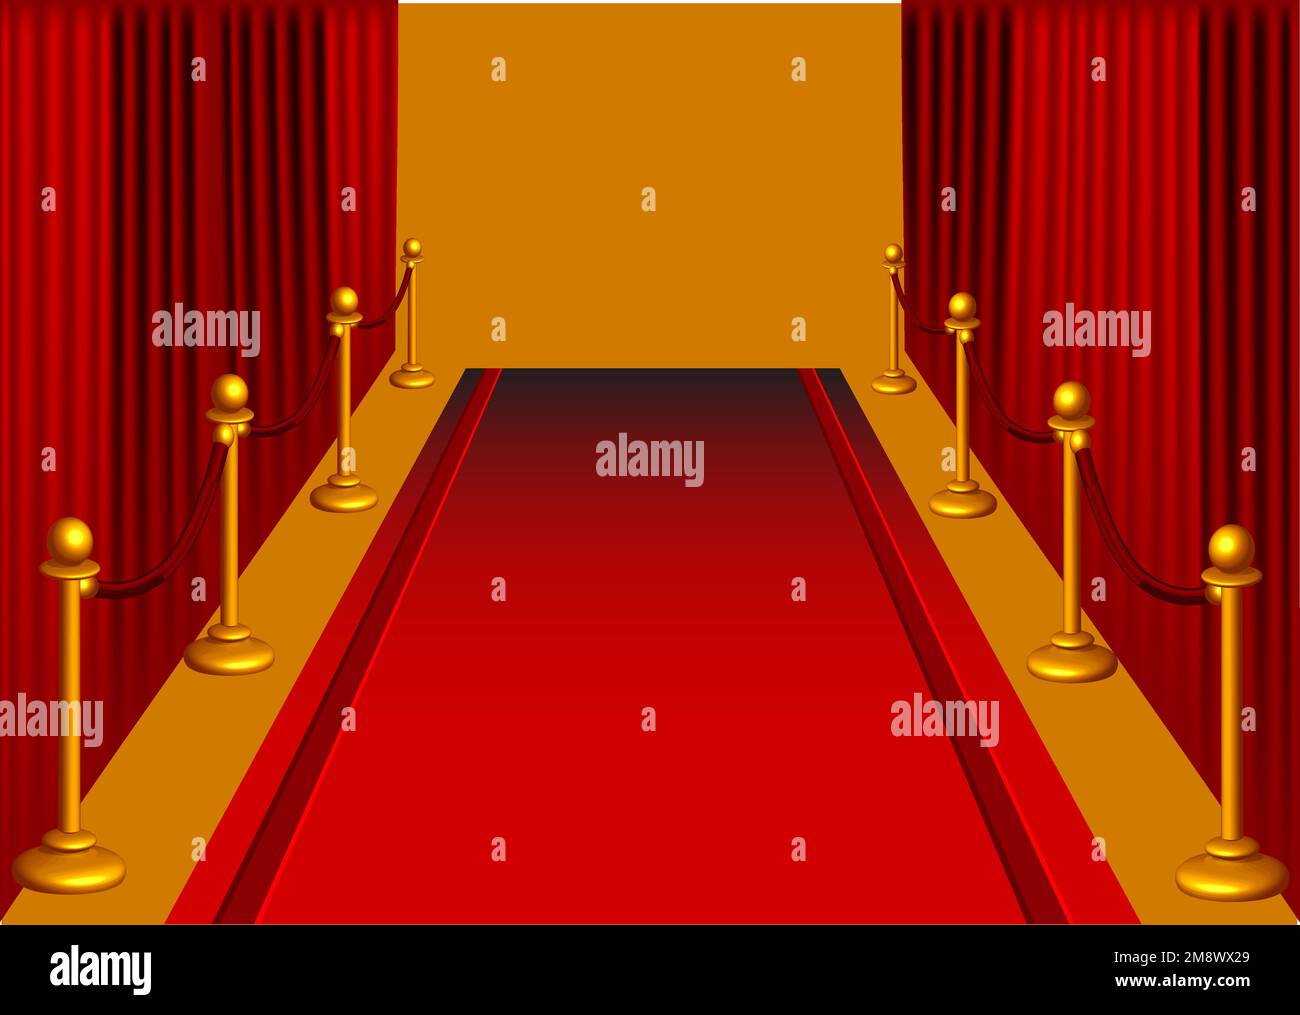 red carpet background and curtain vector illustration Stock Vector